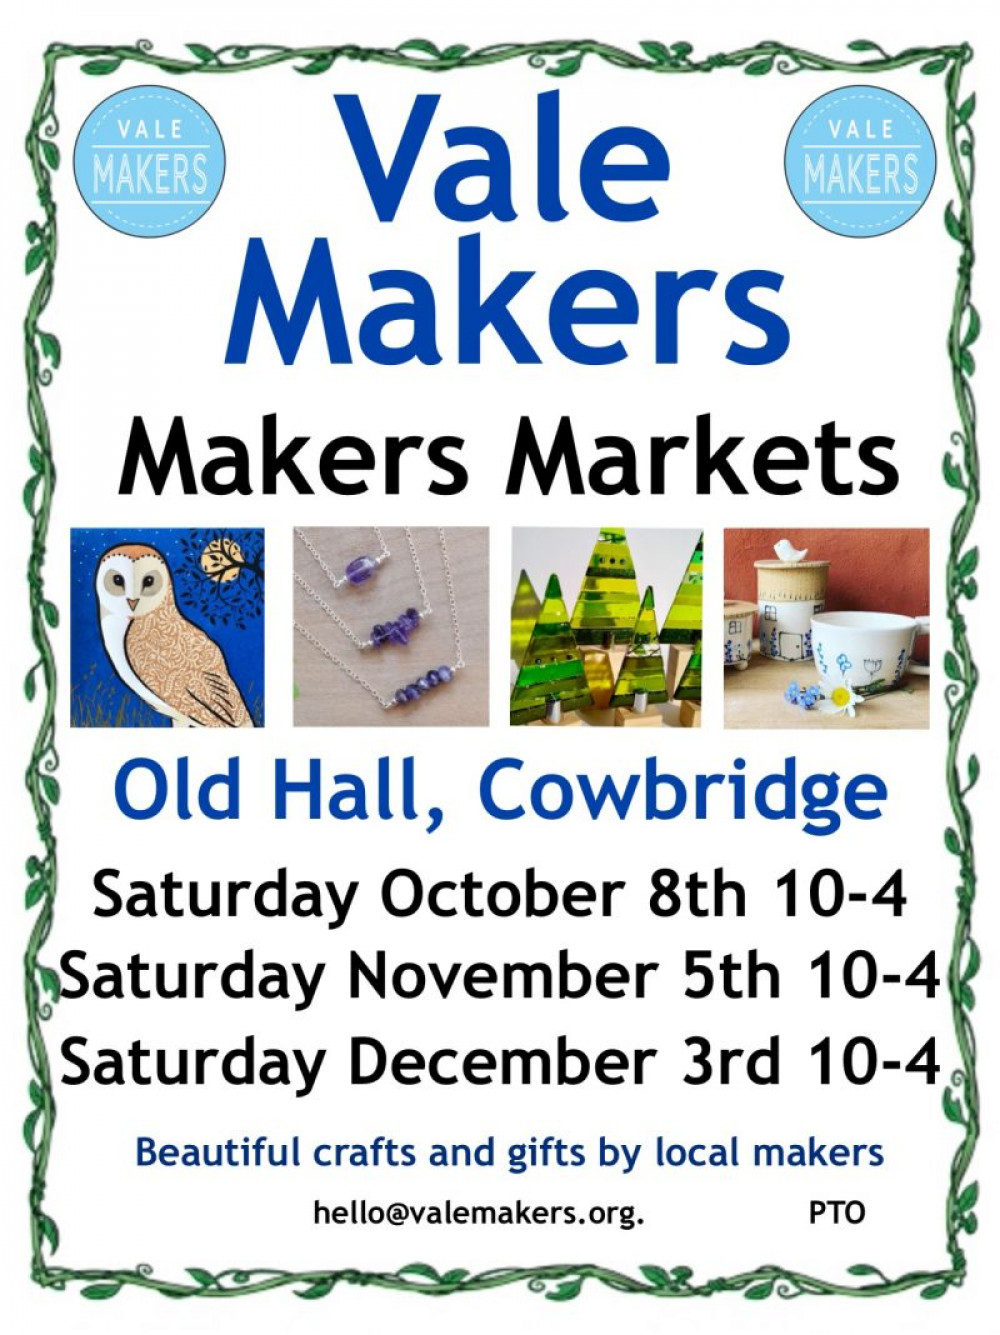 Vale Makers Christmas Market will be held on Saturday, December 3rd